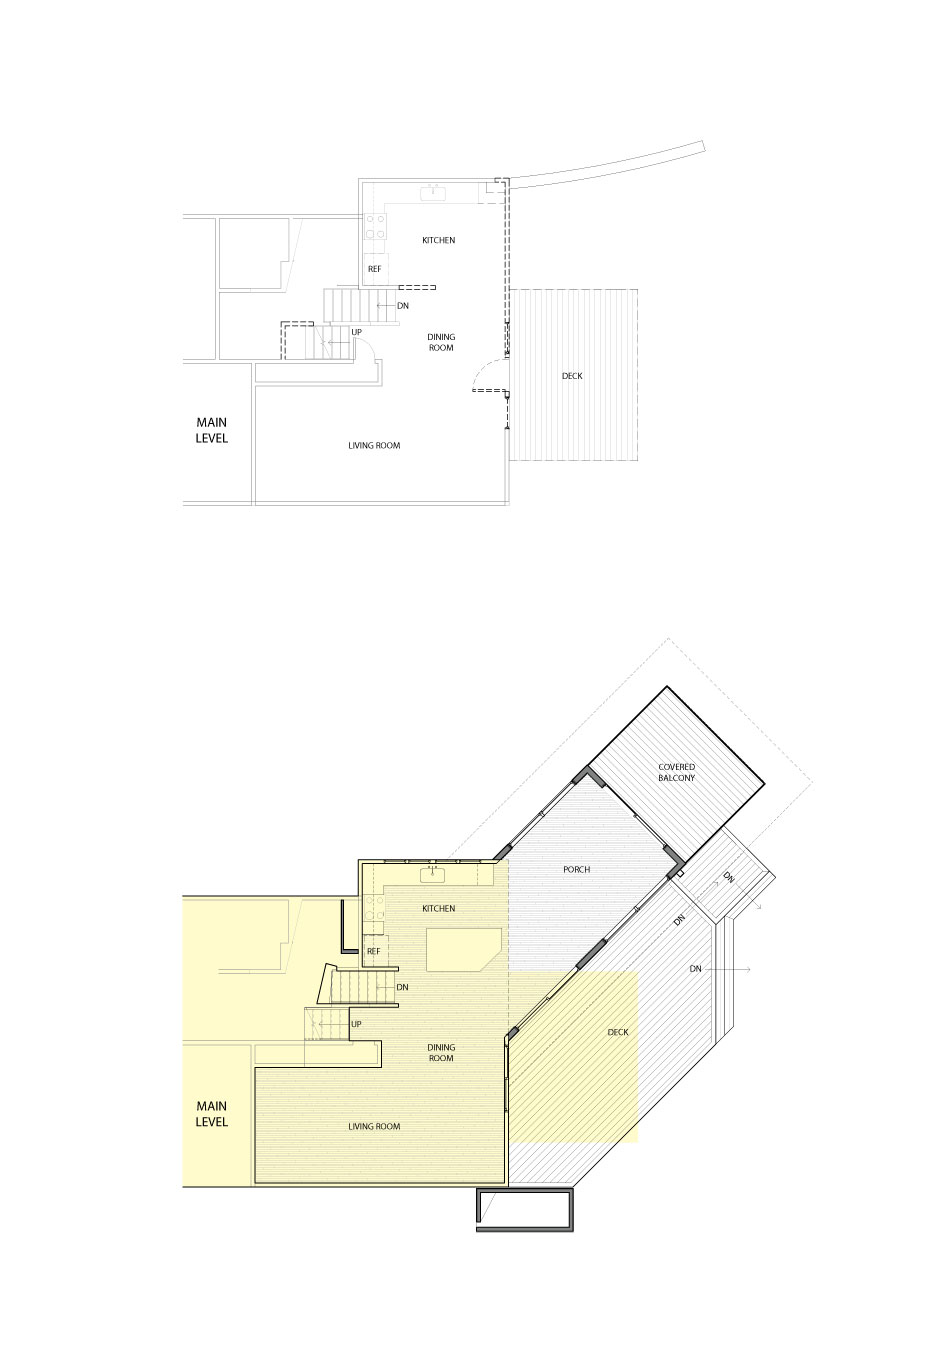 The before and after floor plans of a home remodeled by Close Associates.